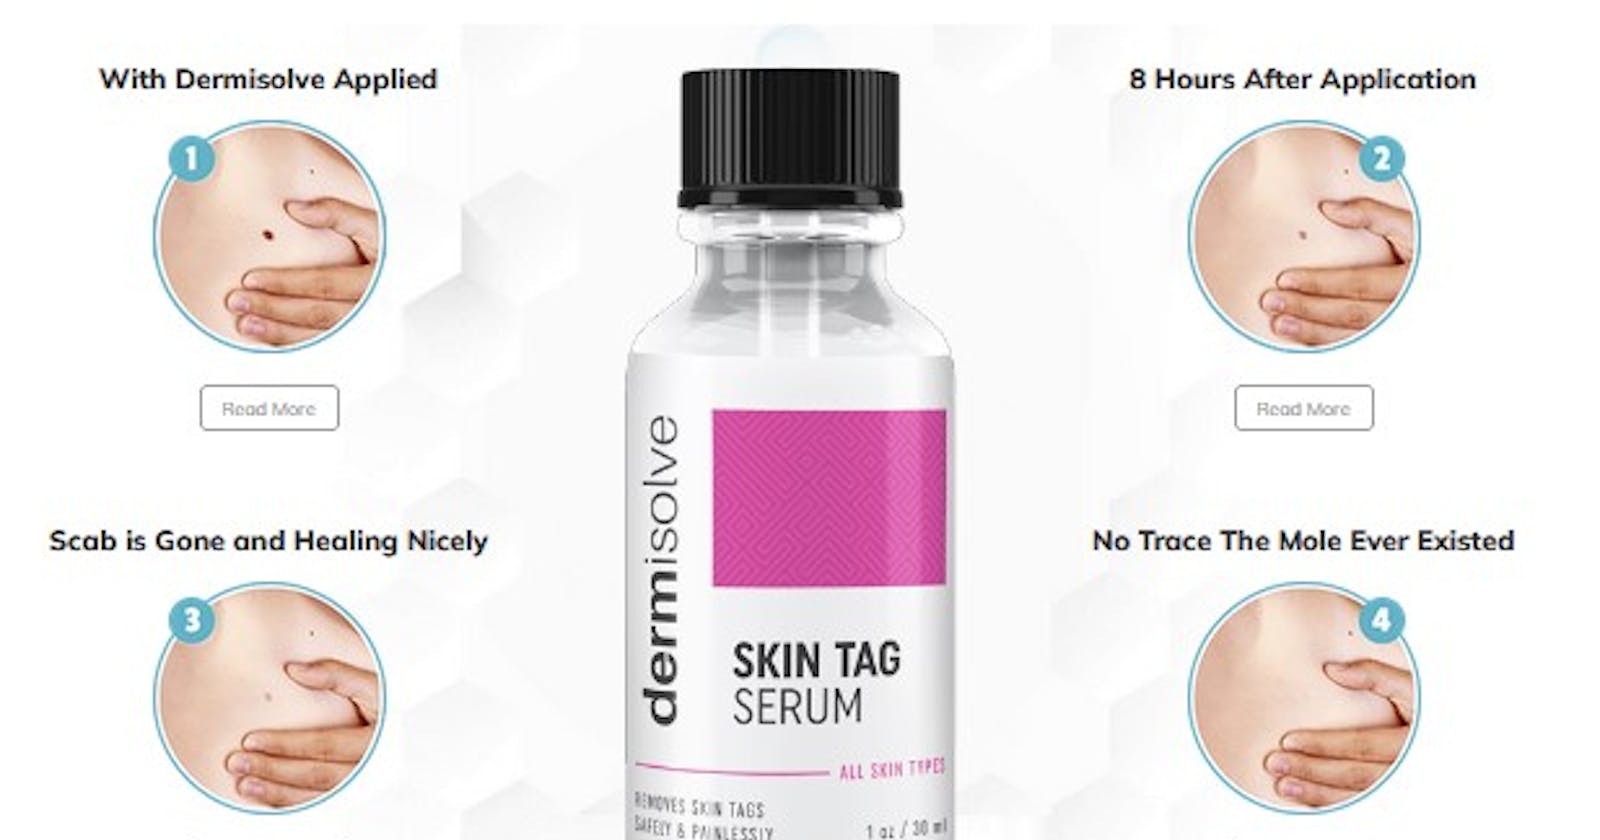 Dermisolve Skin Tag Remover Reviews Don’t Take Before Know This Is It Really Effective 2023?